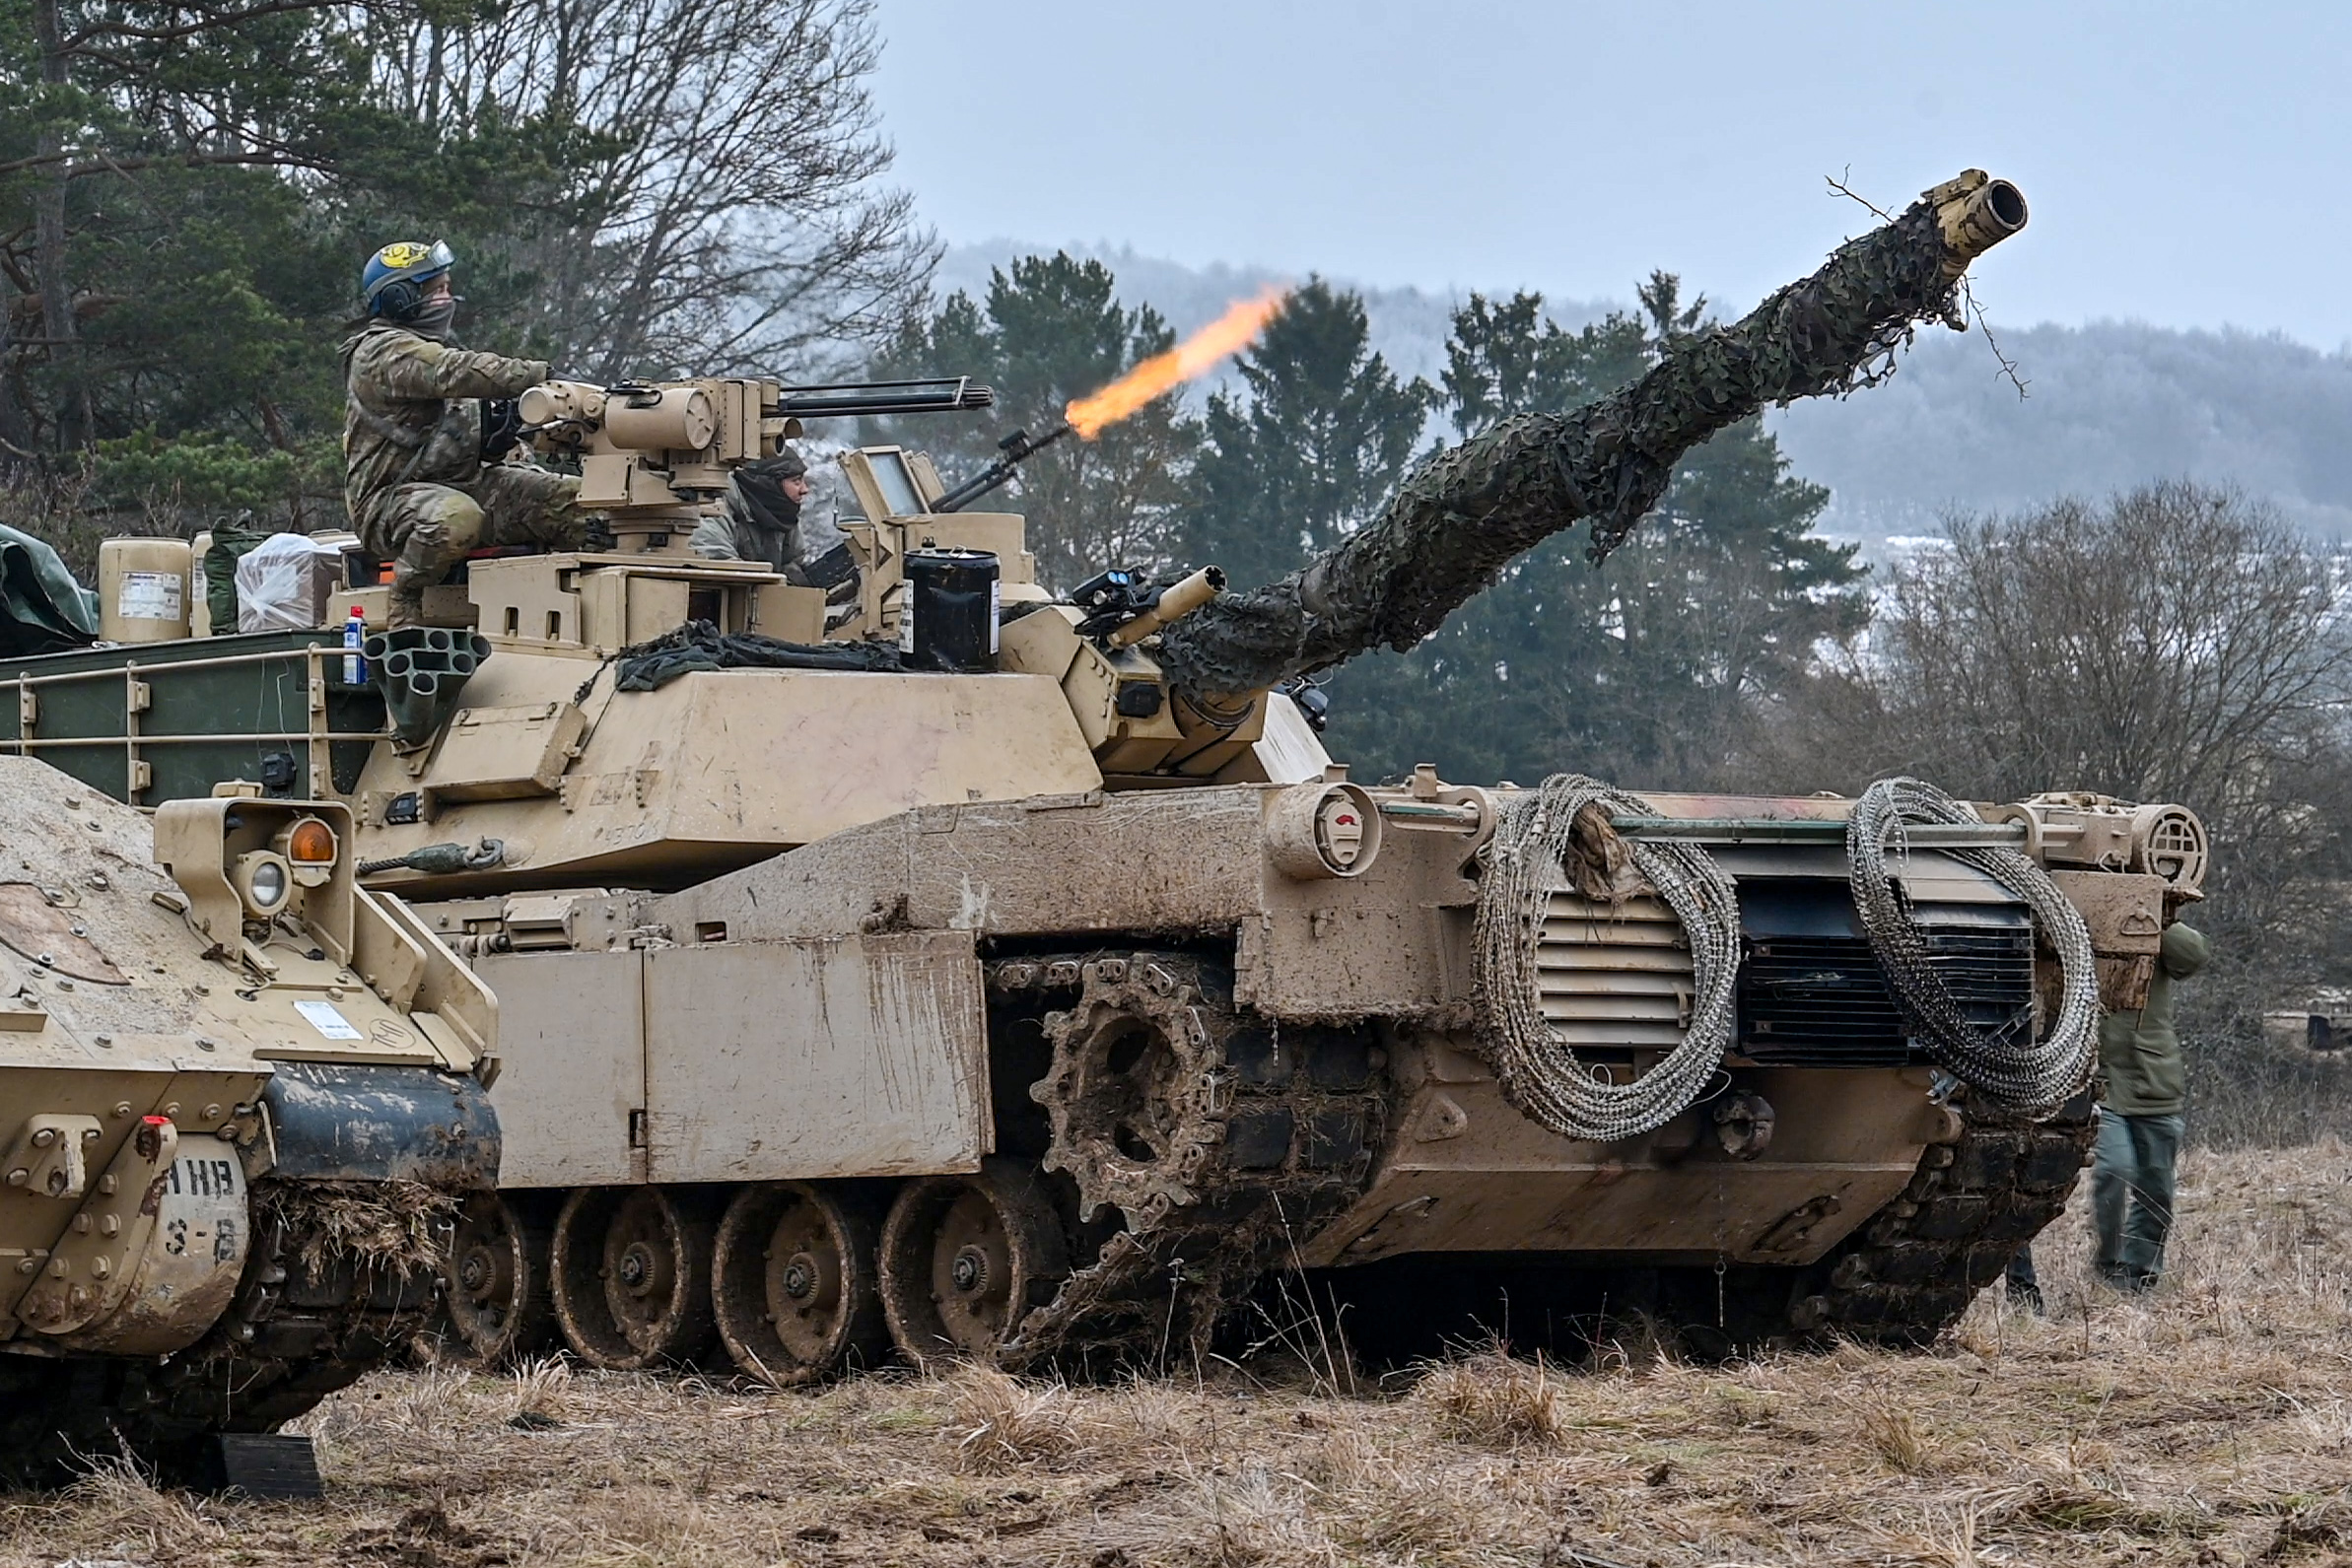 US soldiers fire from an M1 Abrams main battle tank during an international military exercise in Bavaria, Germany.